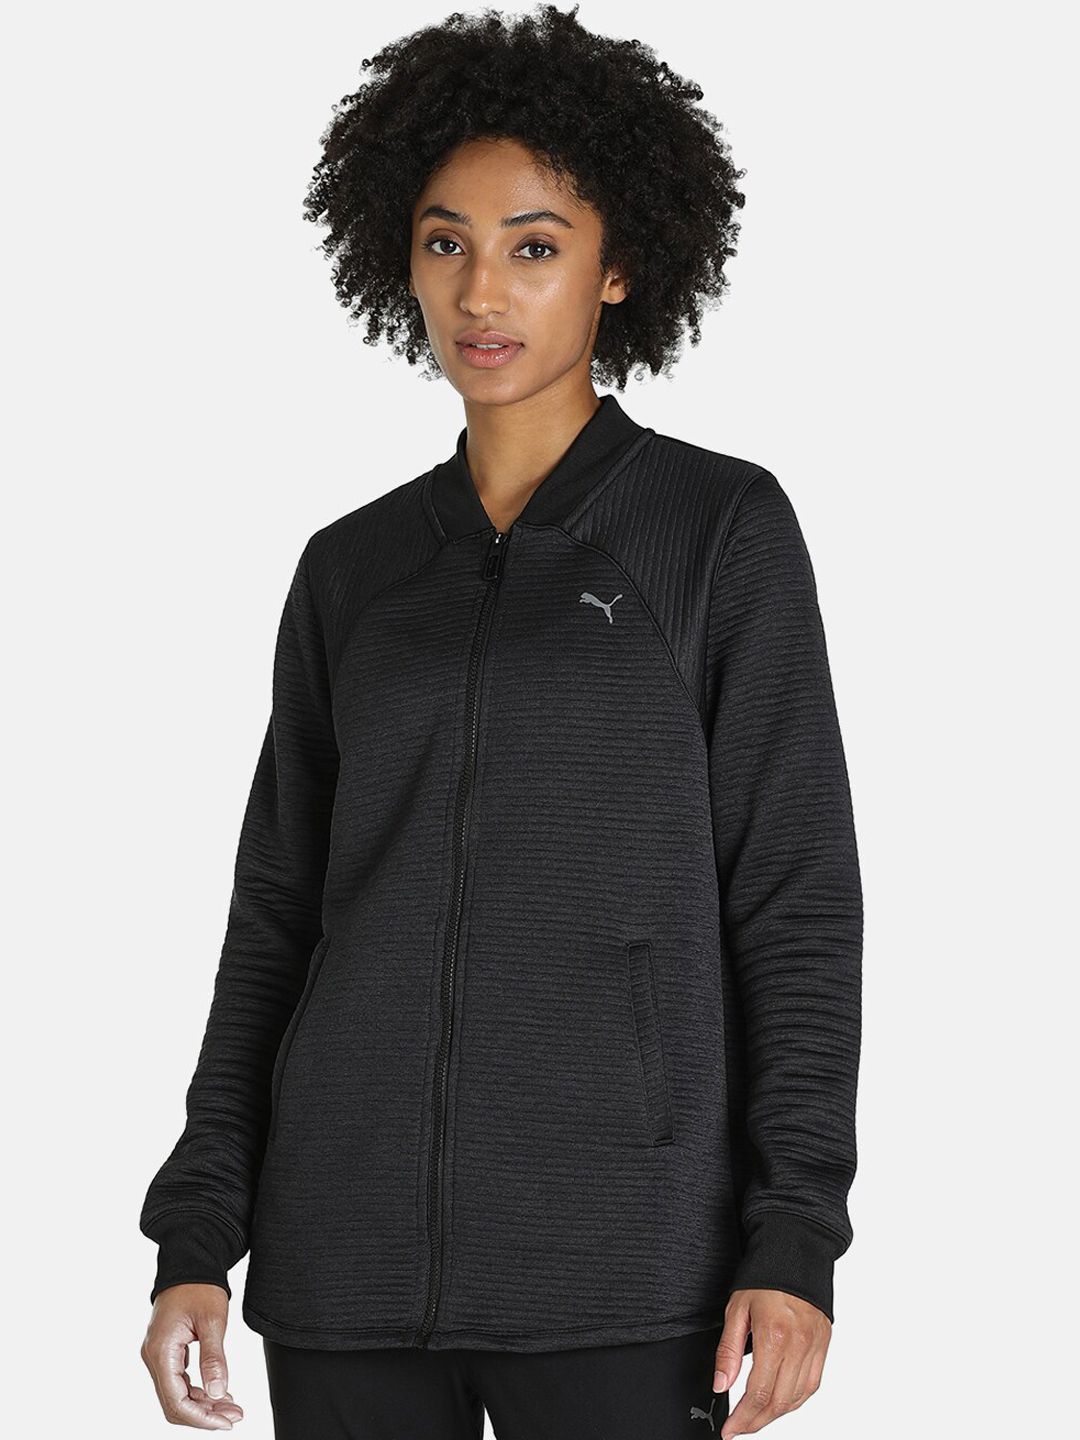 Puma Women Black Relaxed Fit  Yoga Jacket Price in India